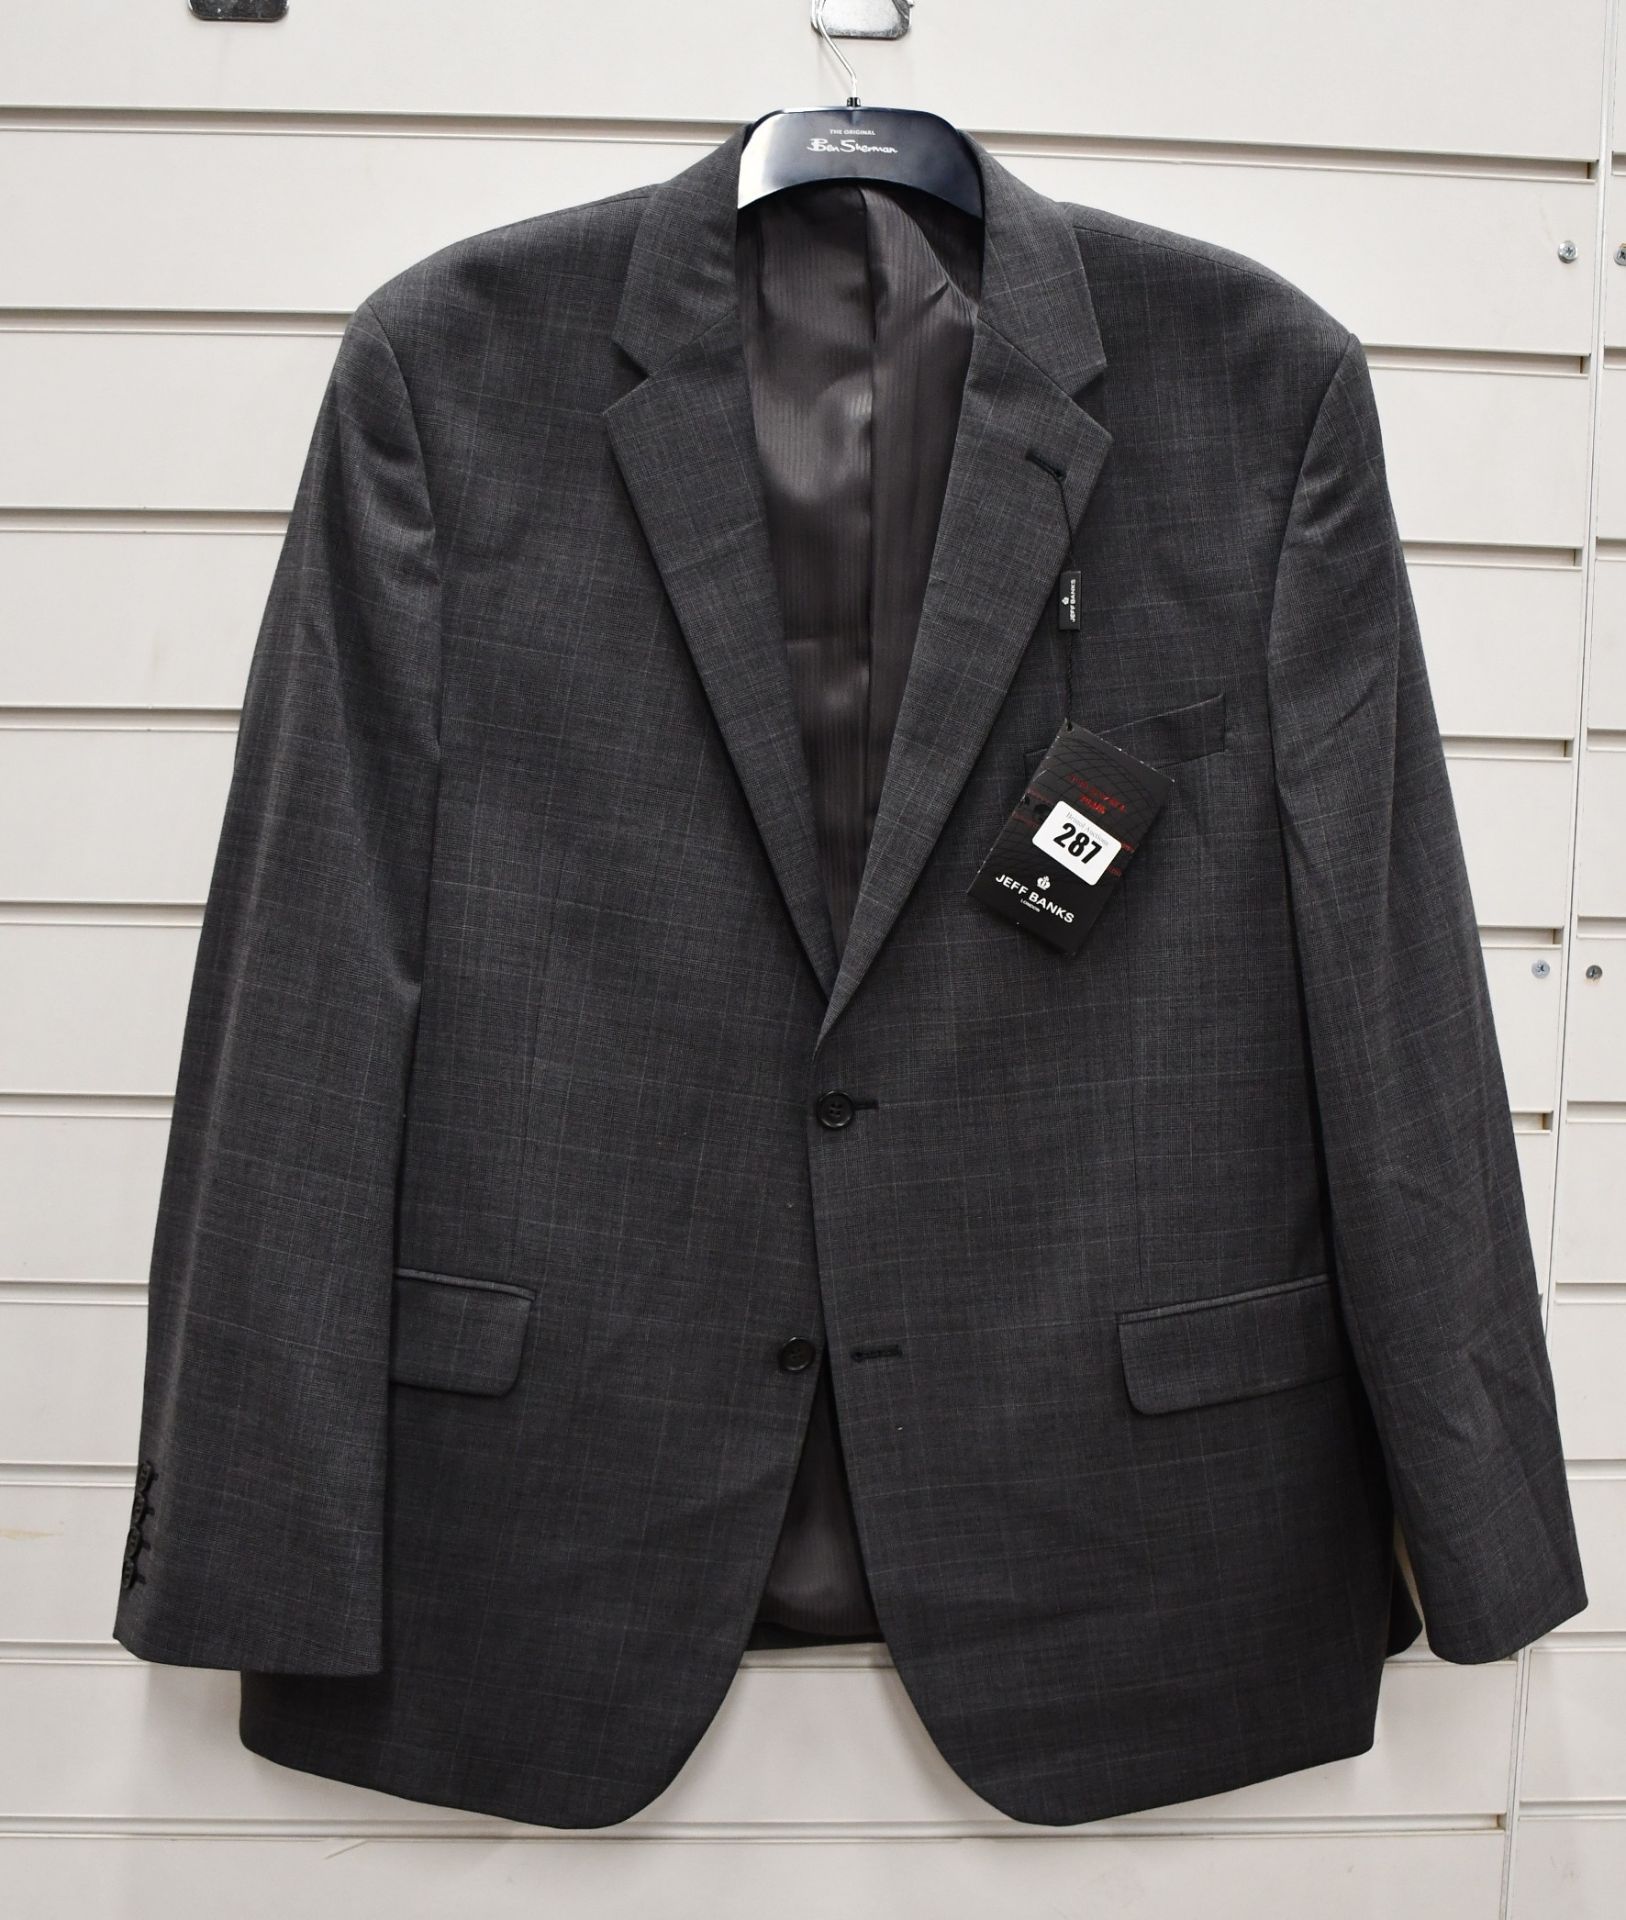 An as new Jeff Banks suit jacket (46R- RRP £149).